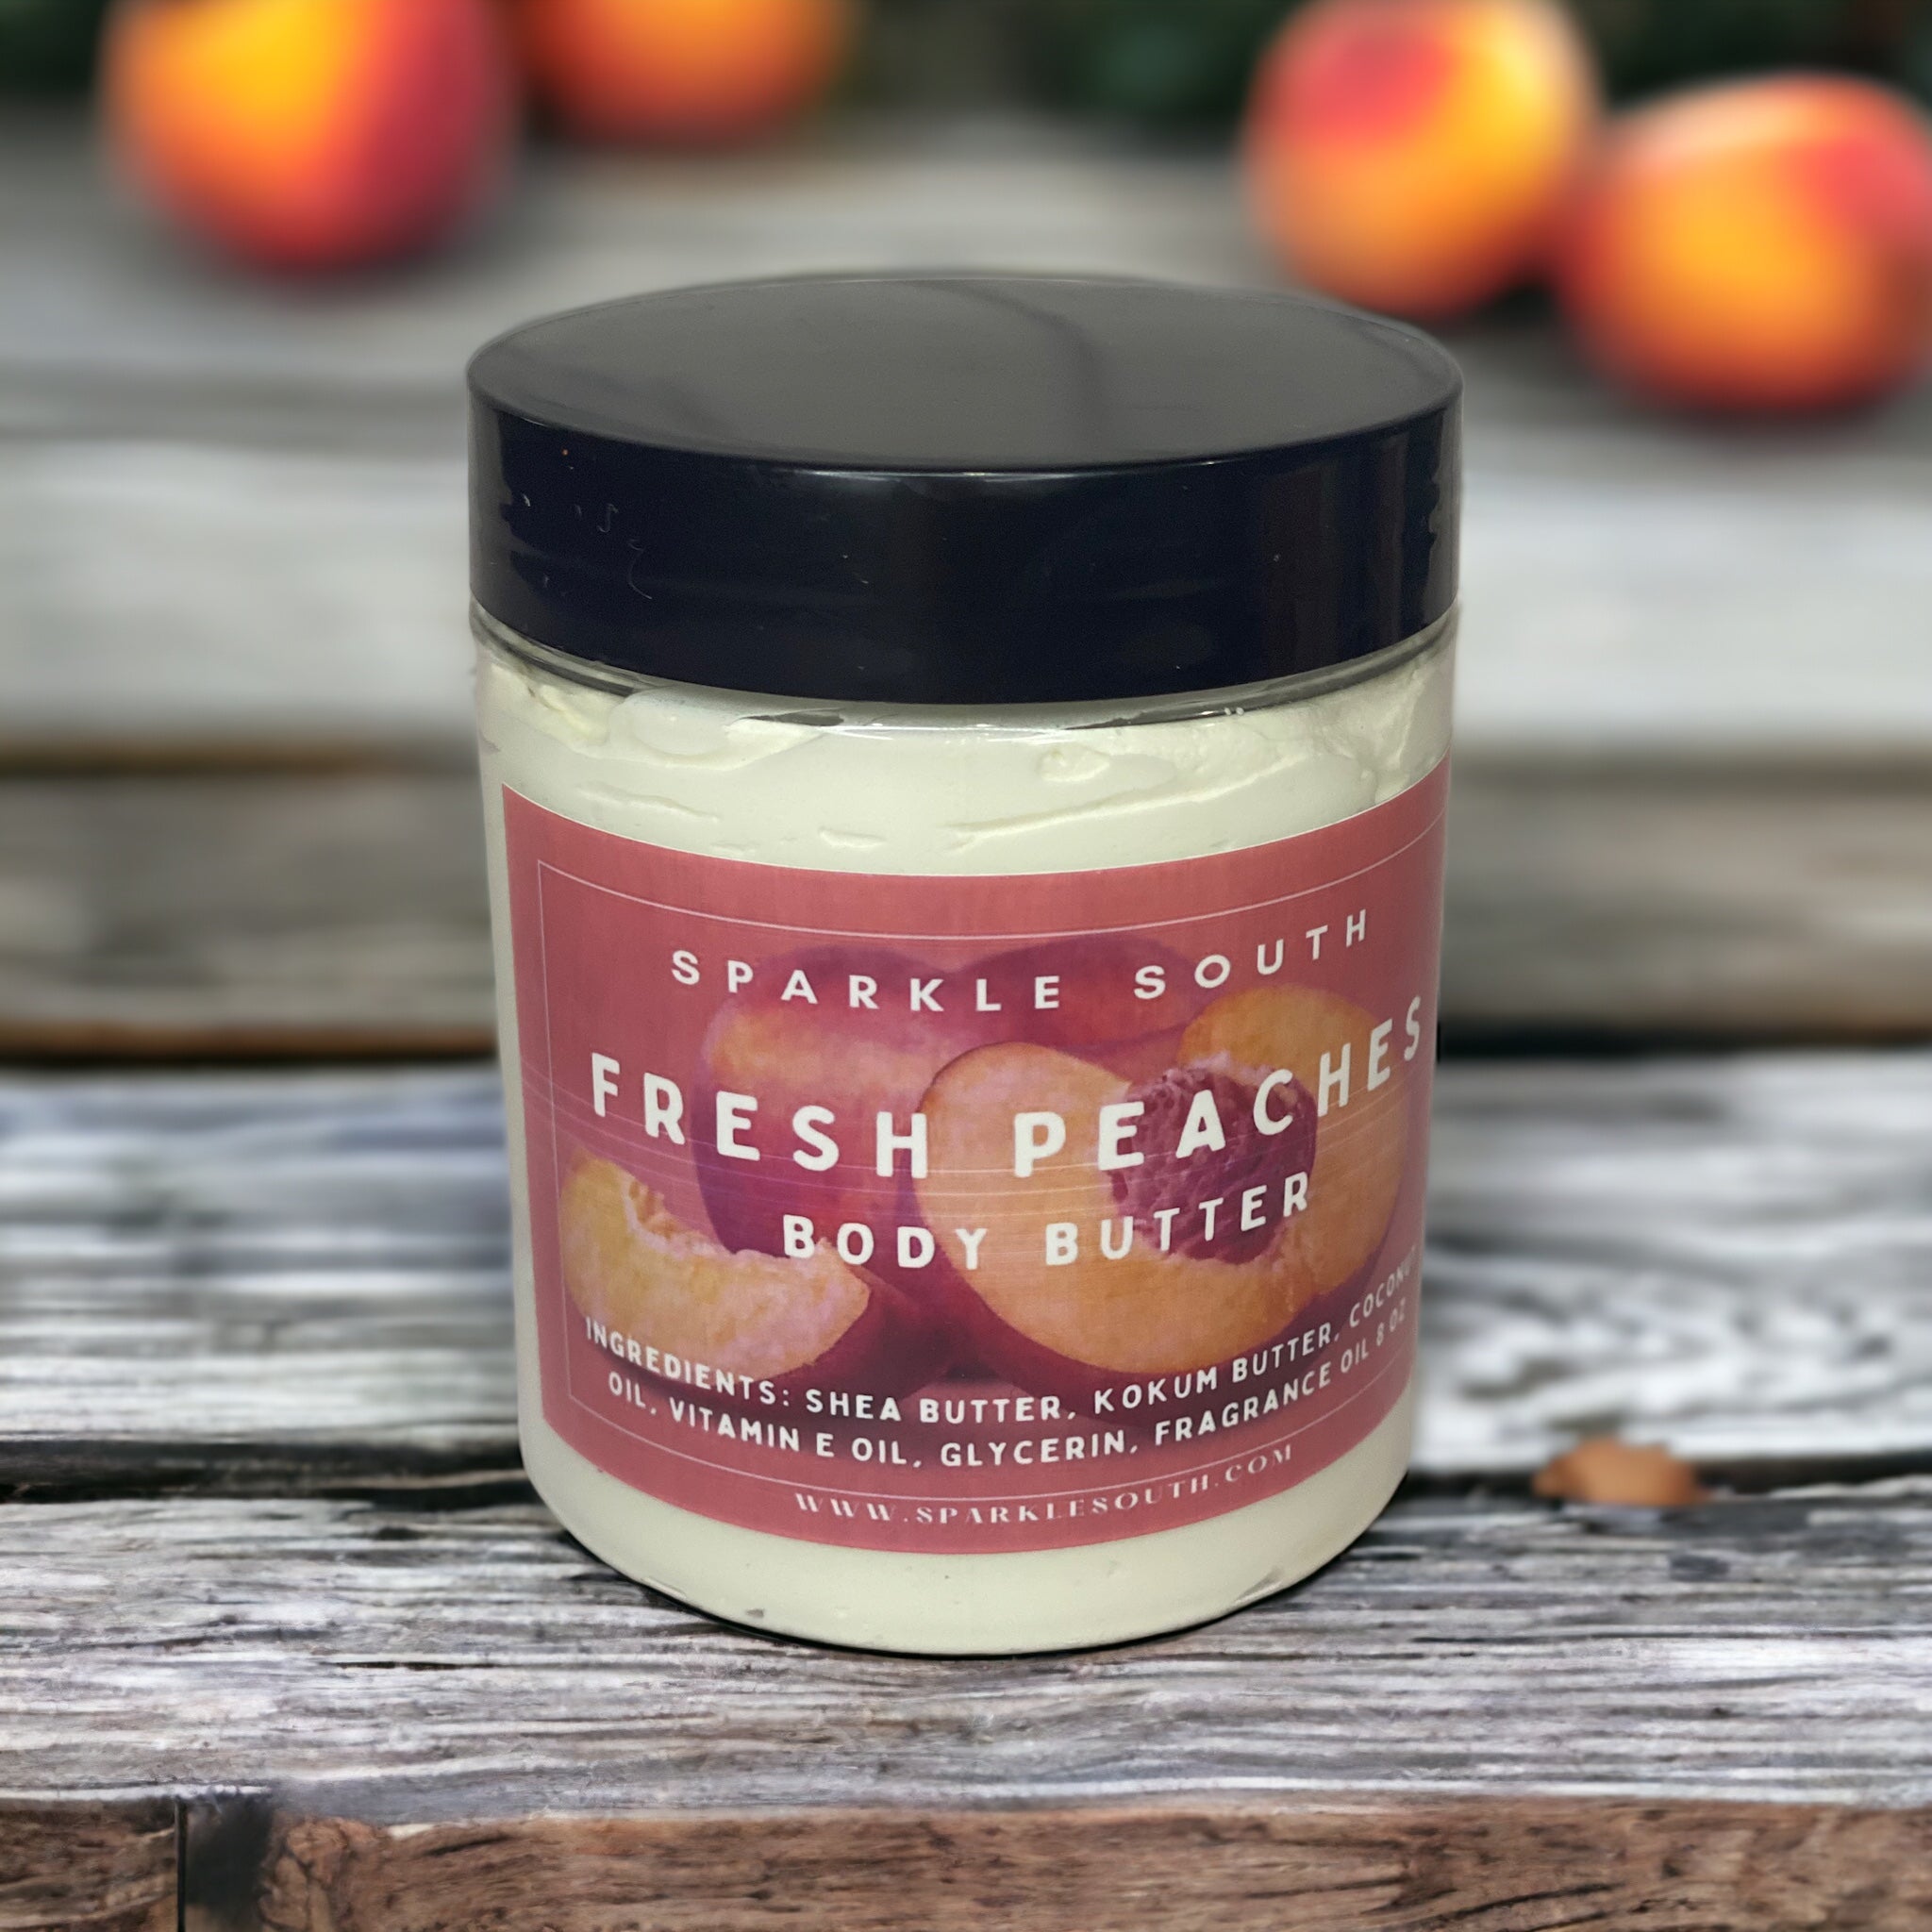 Peaches and Cream Body Butter - Sparkle South